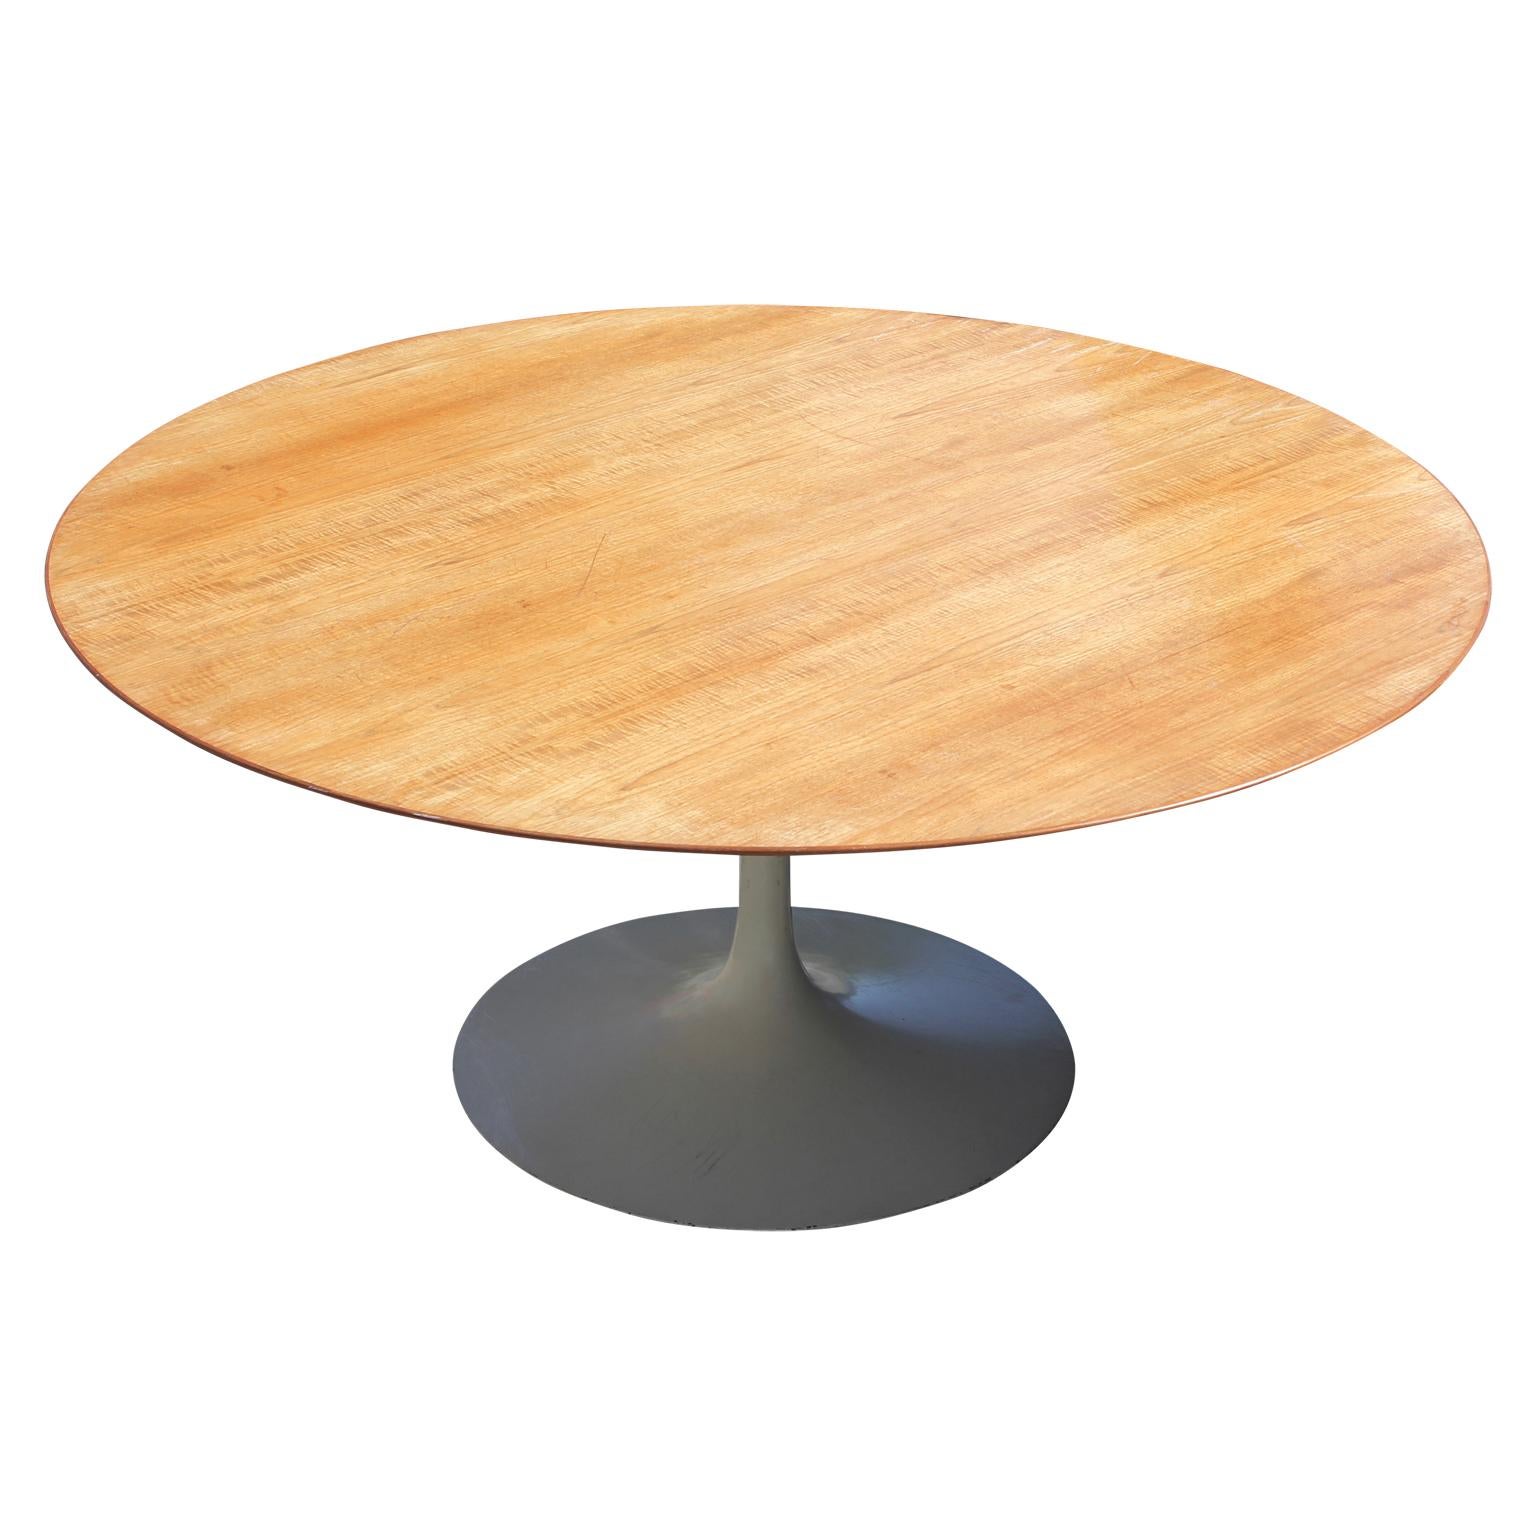 Rare midcentury round tulip table by Knoll and Saarinen. The wooden tabletop has a 68 inch diameter and seats four or five people. The base of the table is made from painted cast aluminum. The tabletop is in good vintage condition, and the pedestal